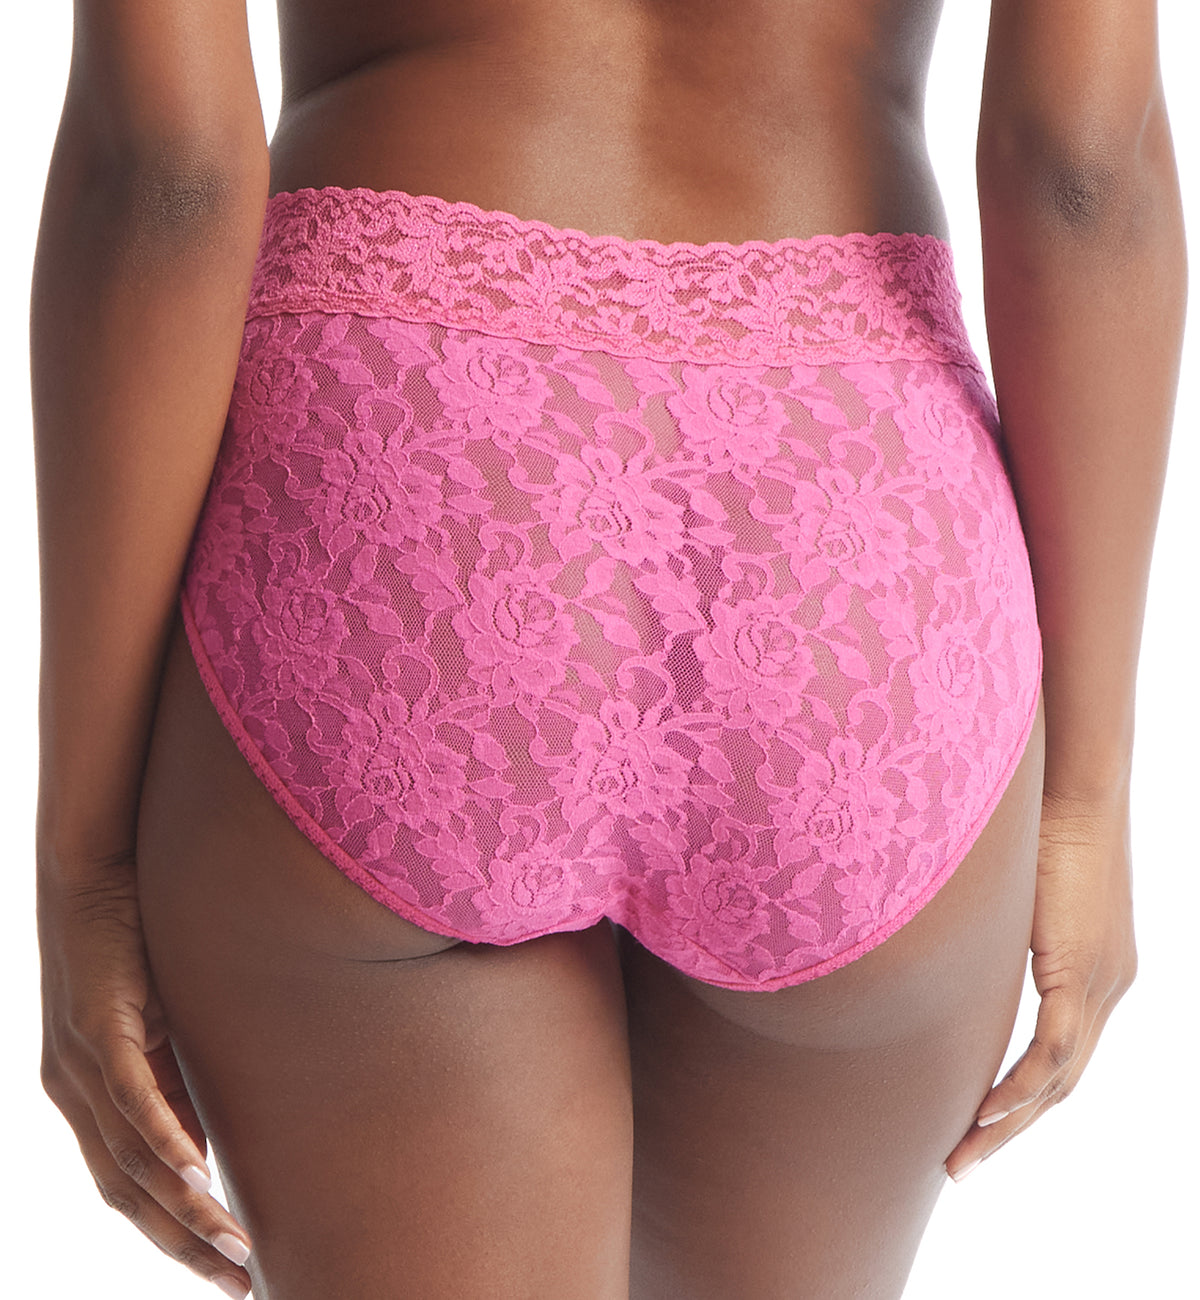 Hanky Panky Signature Lace French Brief (461),Small,Intuition - Intuition,Small